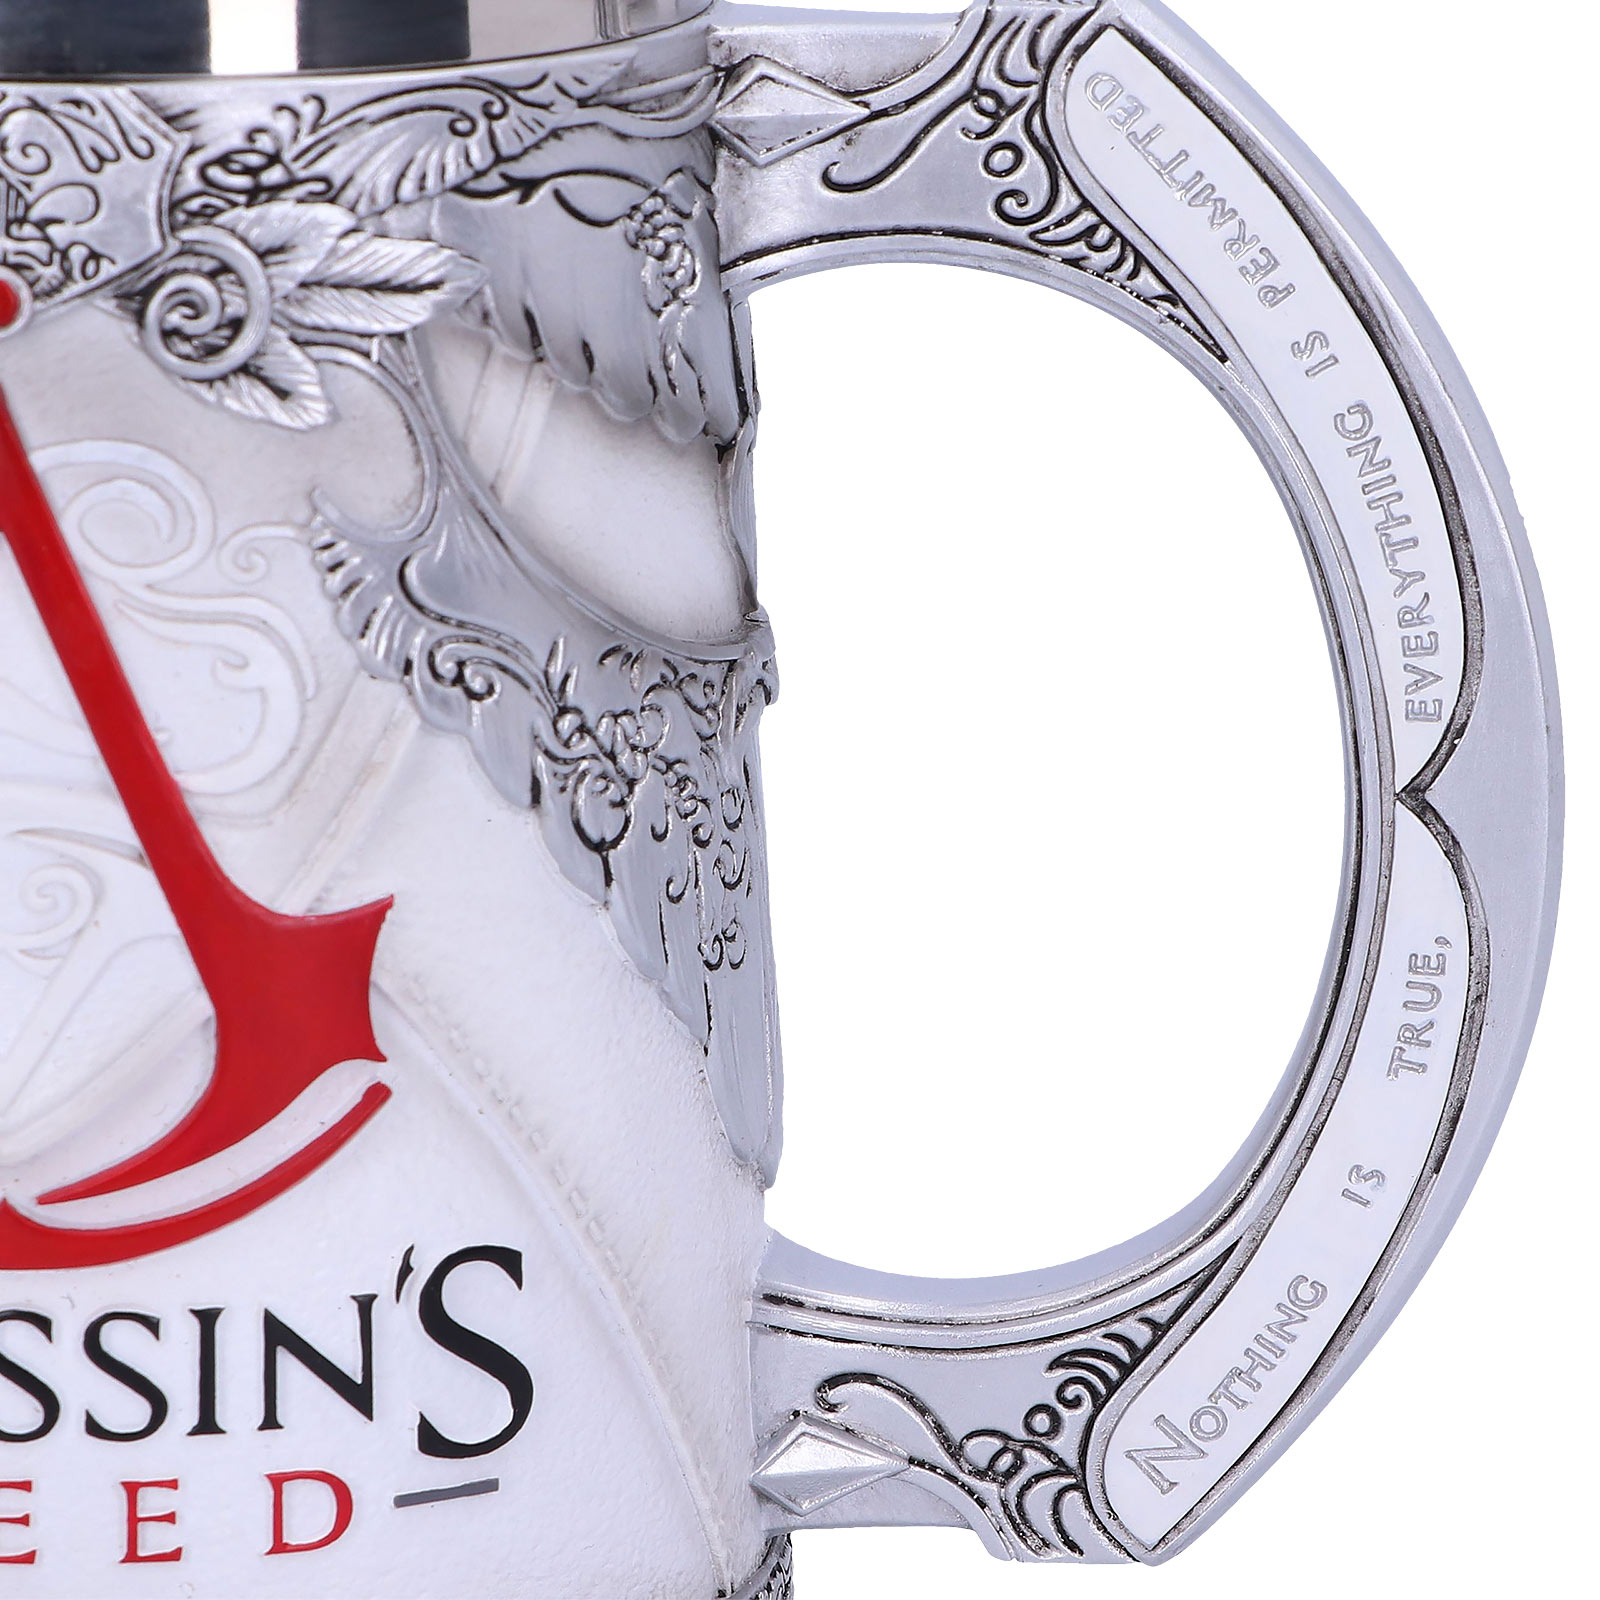 Assassin's Creed - Chope deluxe logo classique